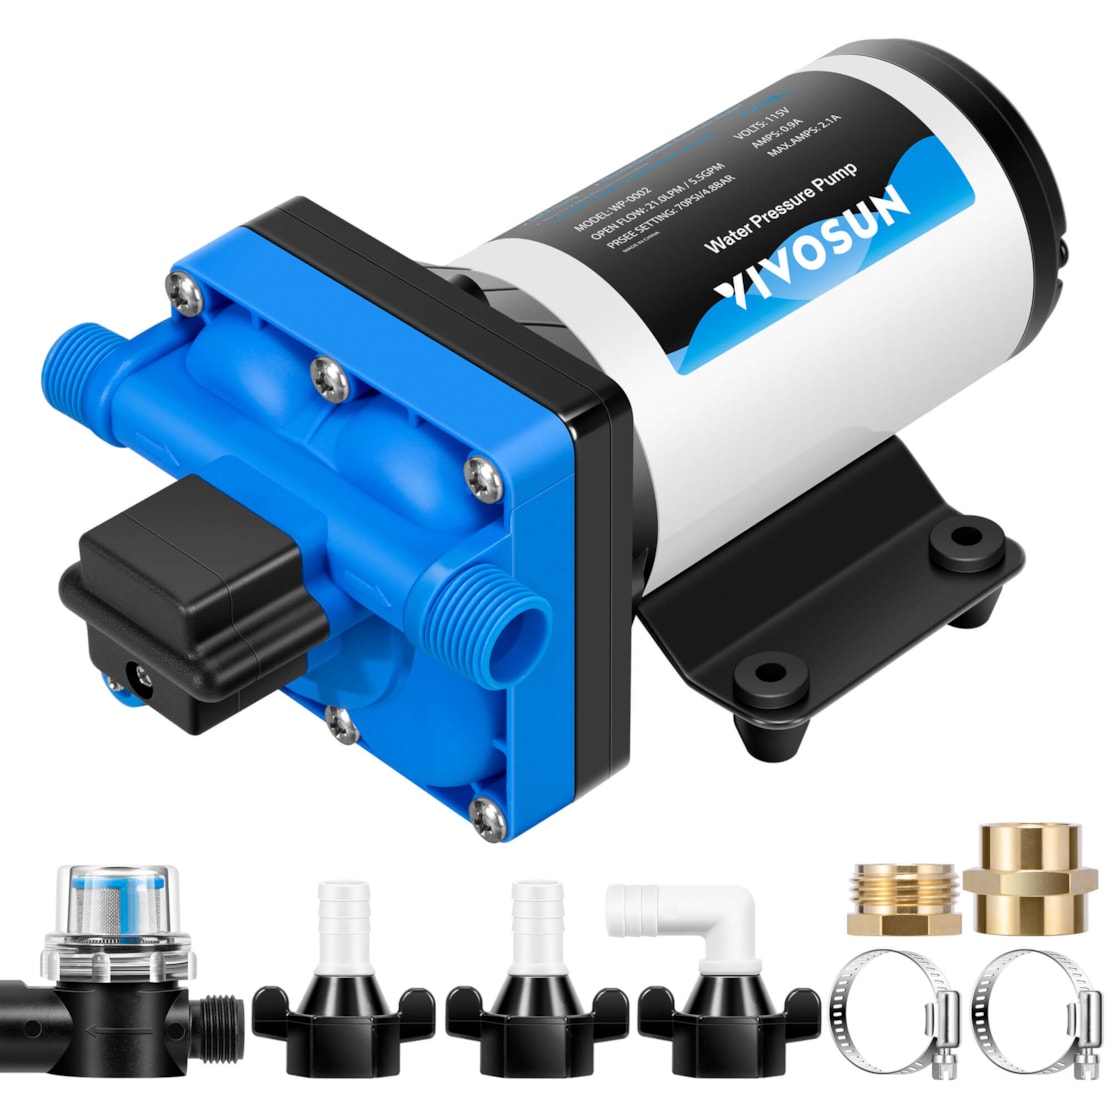 VIVOSUN Water Pressure Pump, 110V 5.5GPM 70 PSI Diaphragm Water Pump Include 1/2" and 3/4" Garden Hose Adapters, Power Plug for Bathrooms, Kitchens, RVs, and Yachts